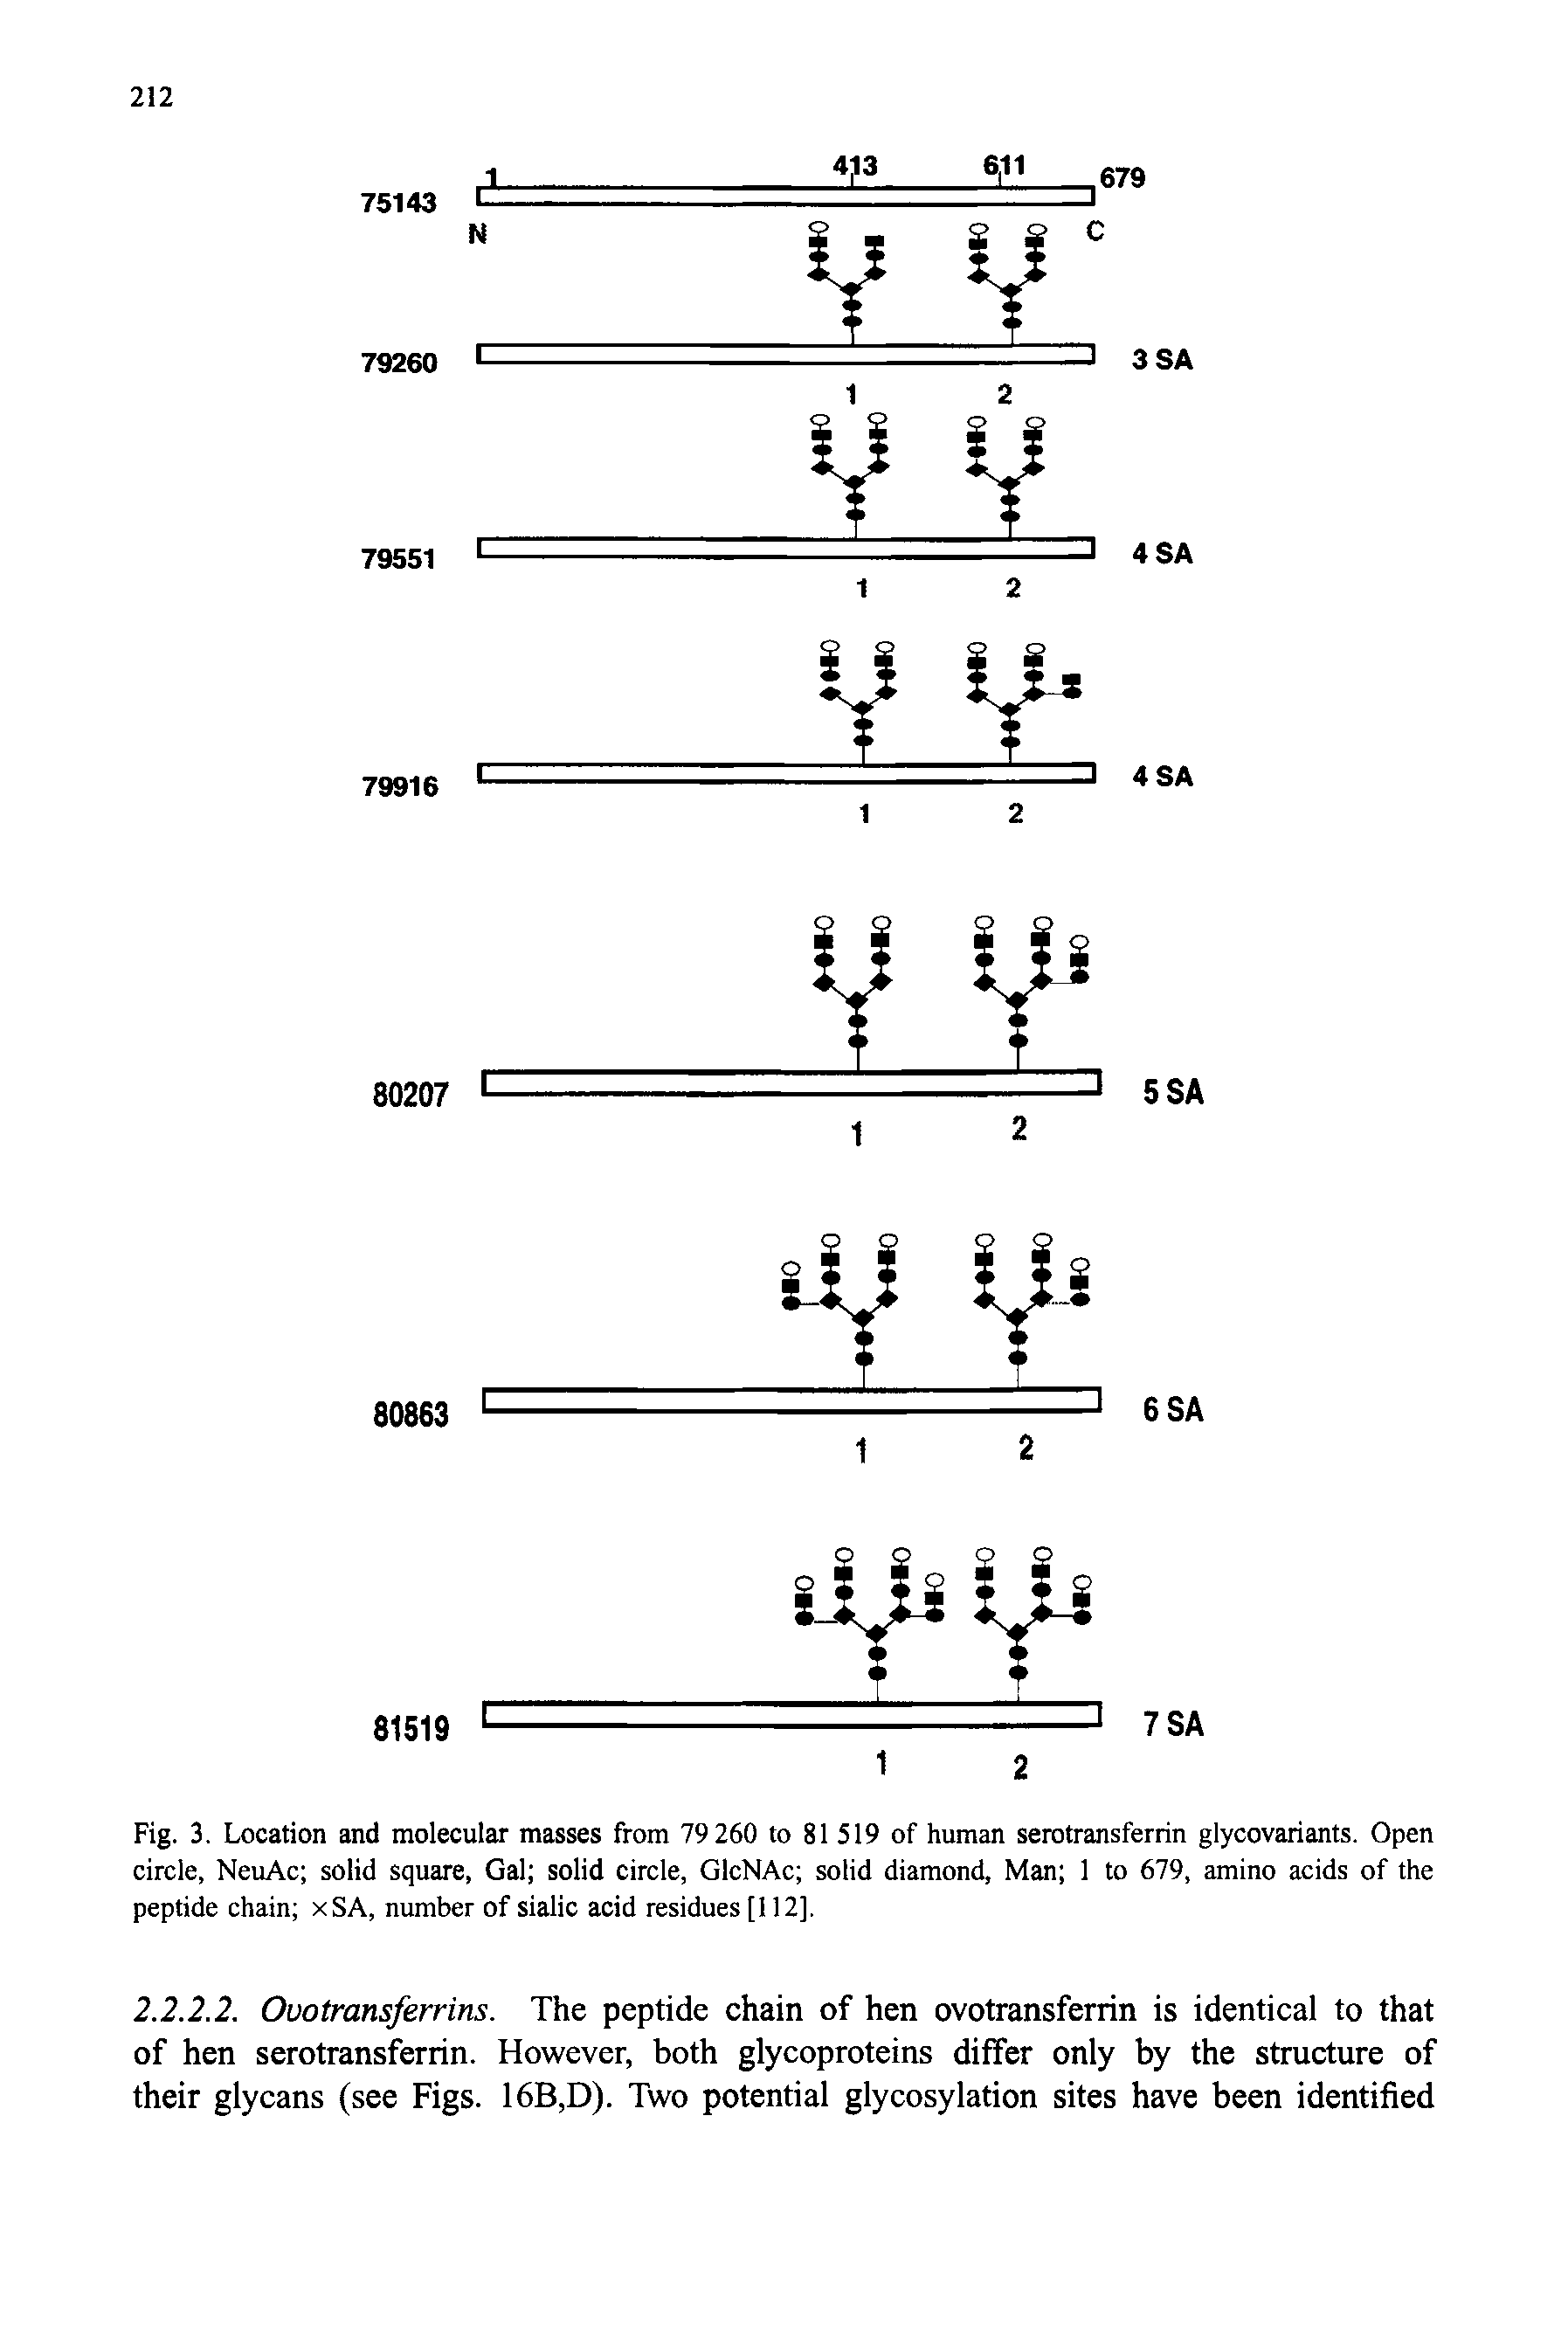 Fig. 3. Location and molecular masses from 79 260 to 81 519 of human serotransferrin glycovariants. Open circle, NeuAc solid square, Gal solid circle, GlcNAc solid diamond, Man 1 to 679, amino acids of the peptide chain xSA, number of sialic acid residues [112],...